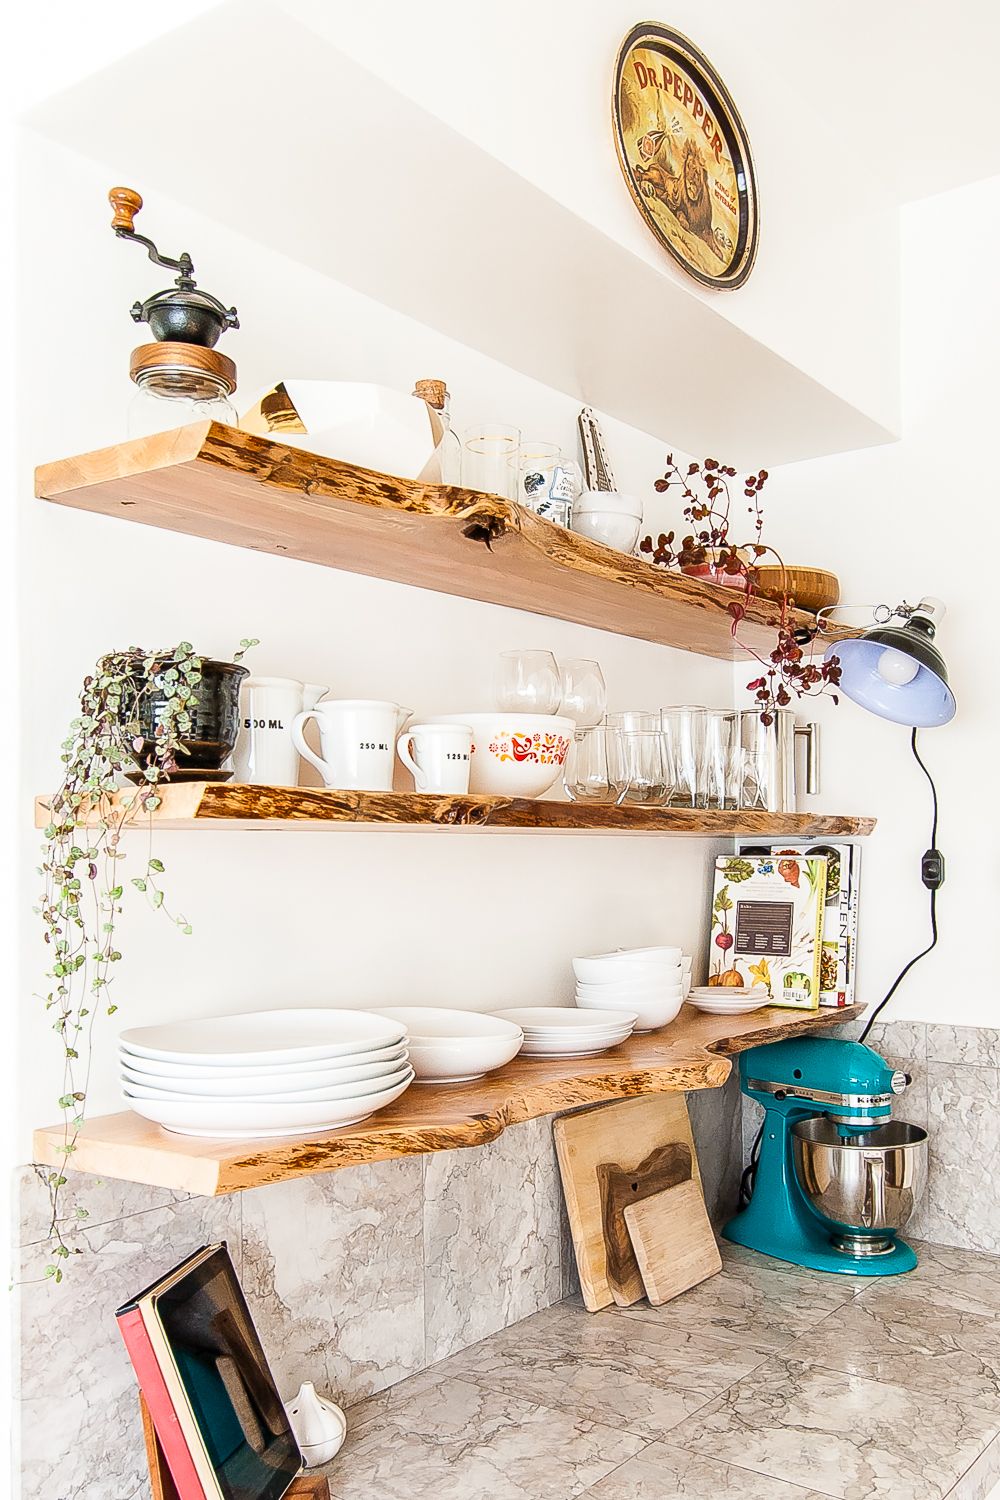 5 Smart Ways to Style and Organize Open Shelves